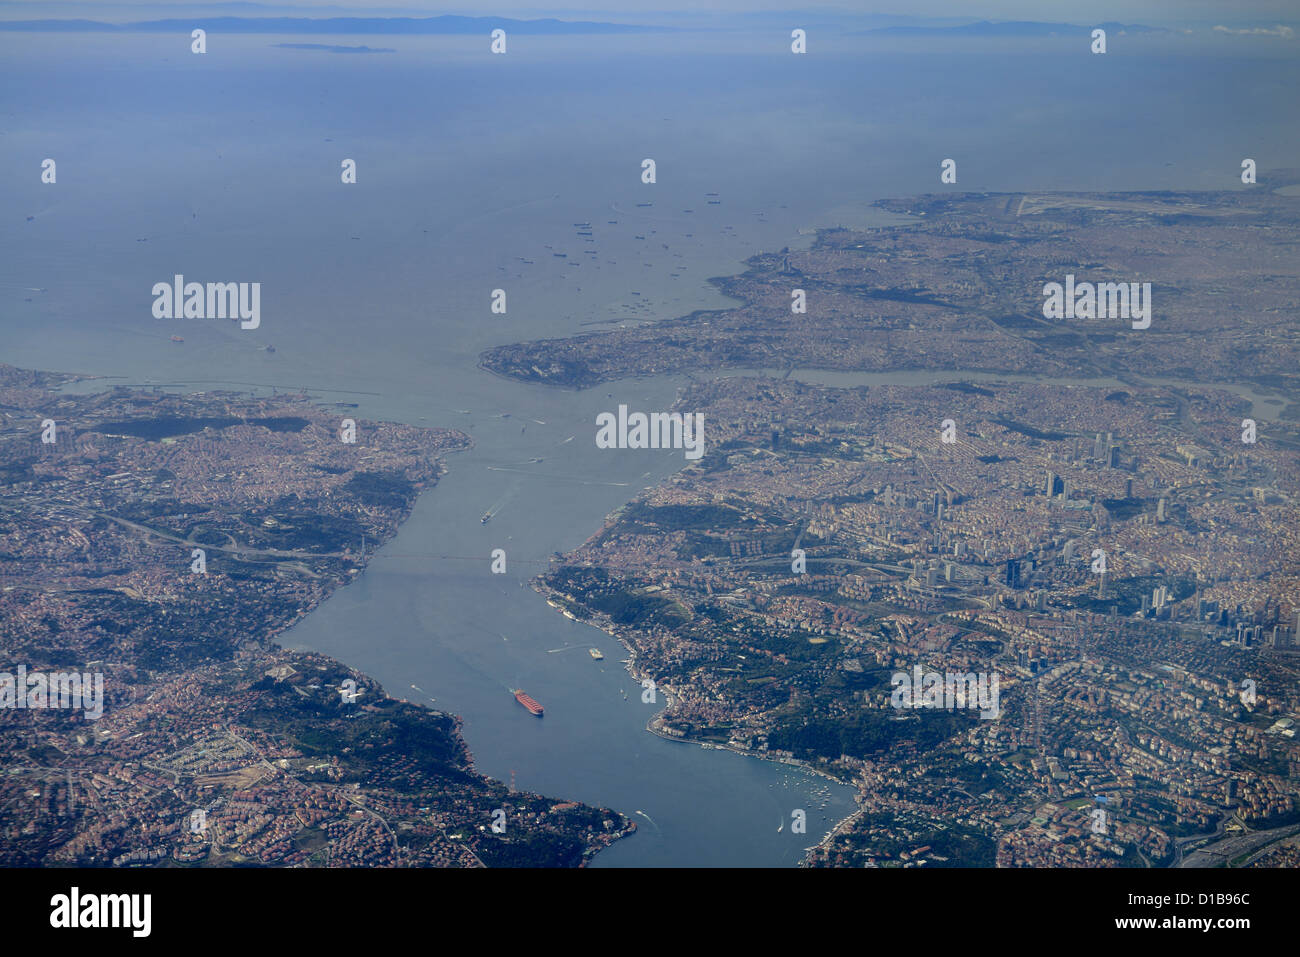 Aerial view of Istanbul Turkey with Golden Horn Bosphorus Strait and Marmara Sea Stock Photo